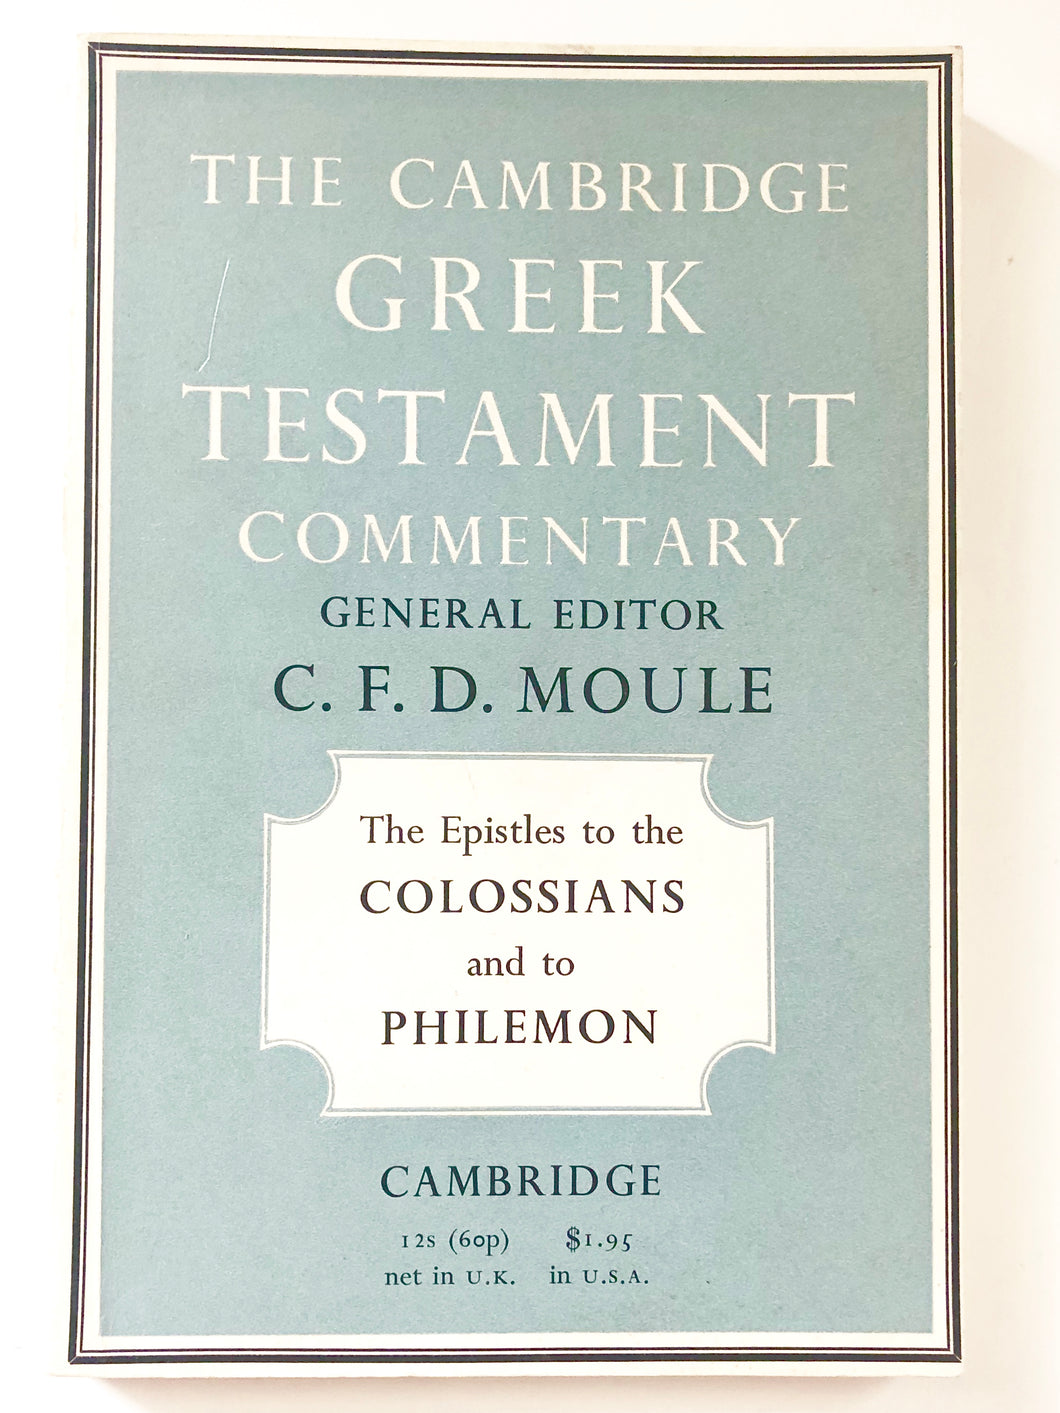 The Epistle to the Colossians and to Philemon (The Cambridge Greek Testament Commentary)	edited by C.F.D. Moule